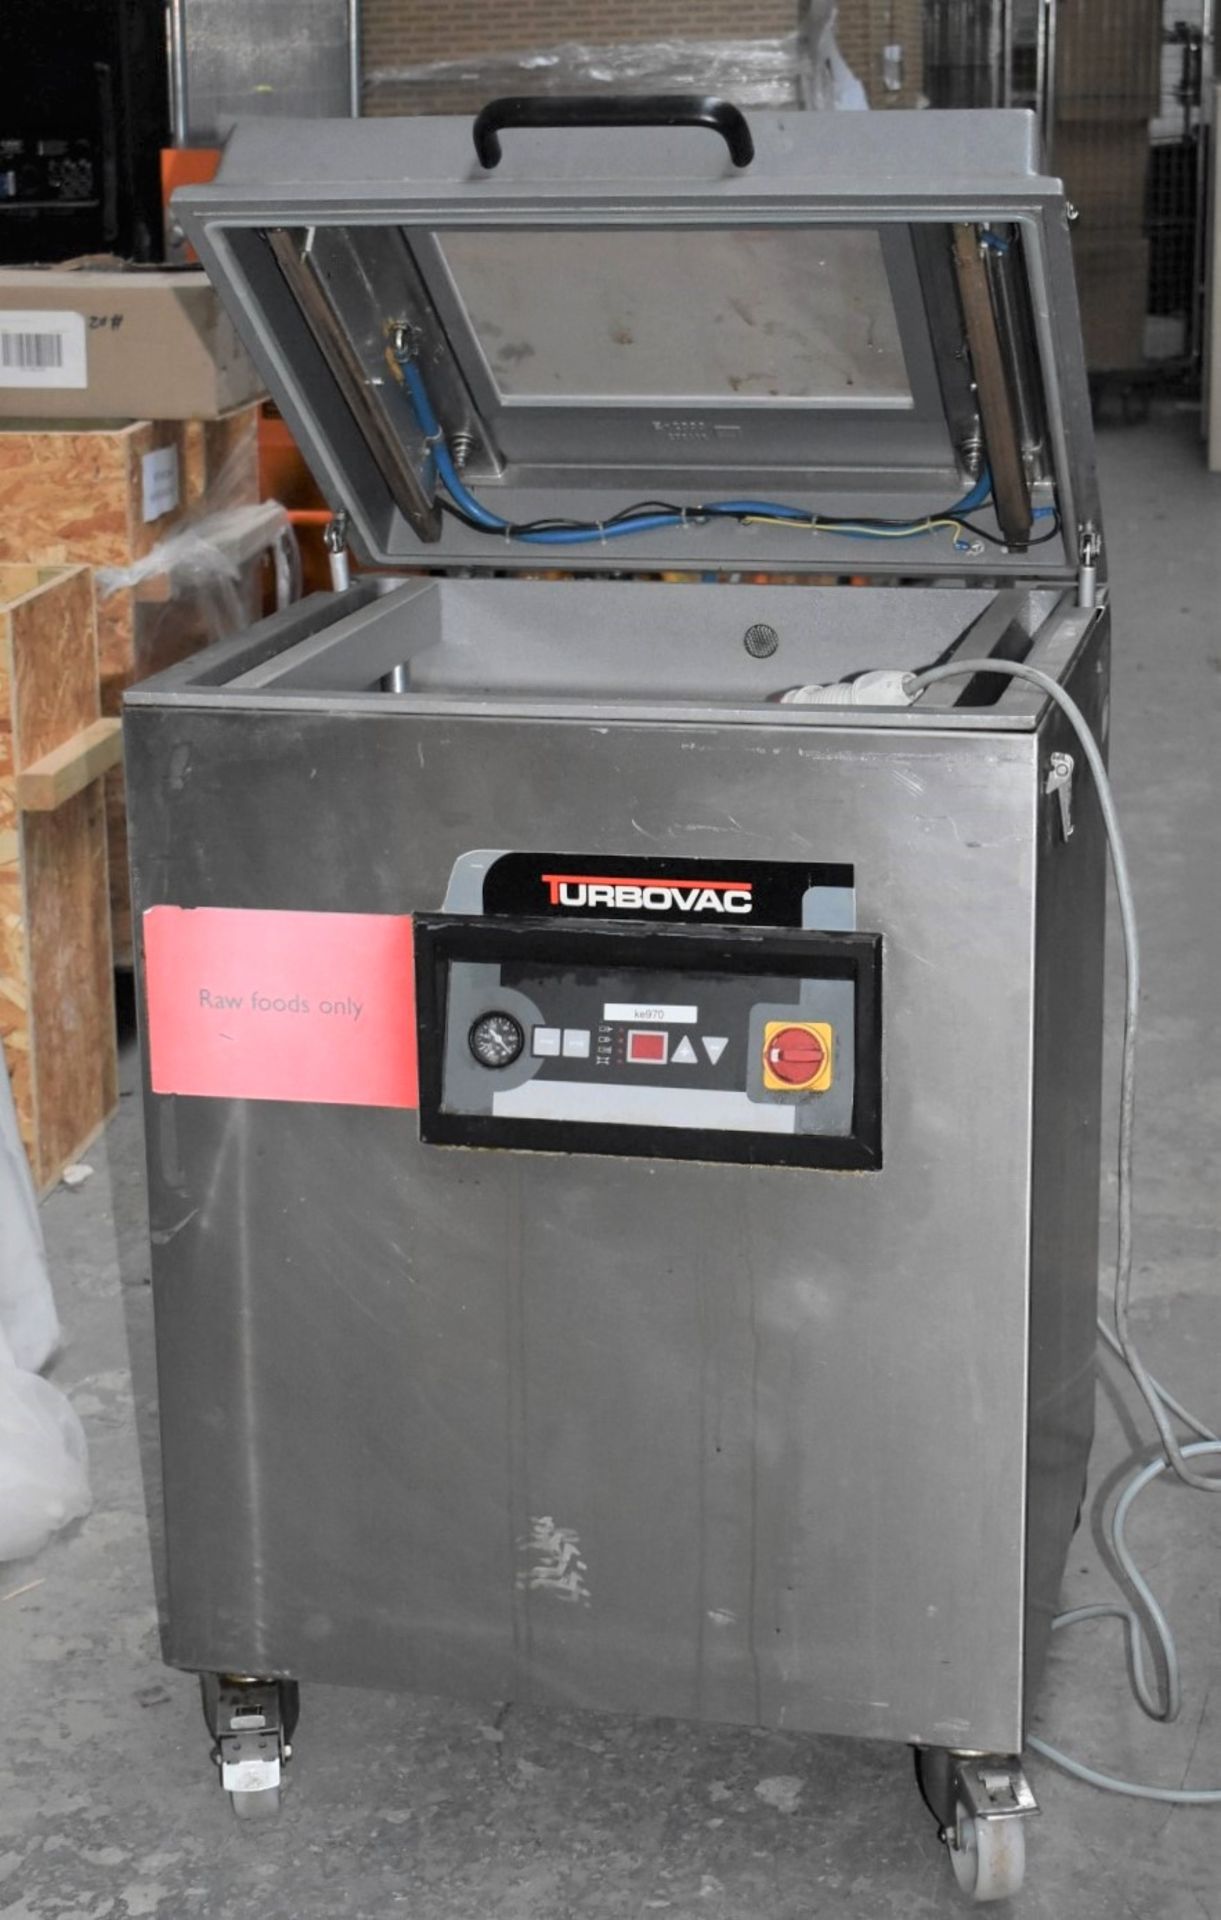 1 x Turbovac Vacuum Packer - Model SB520 - 3 Phase - Recently Removed From a Restaurant